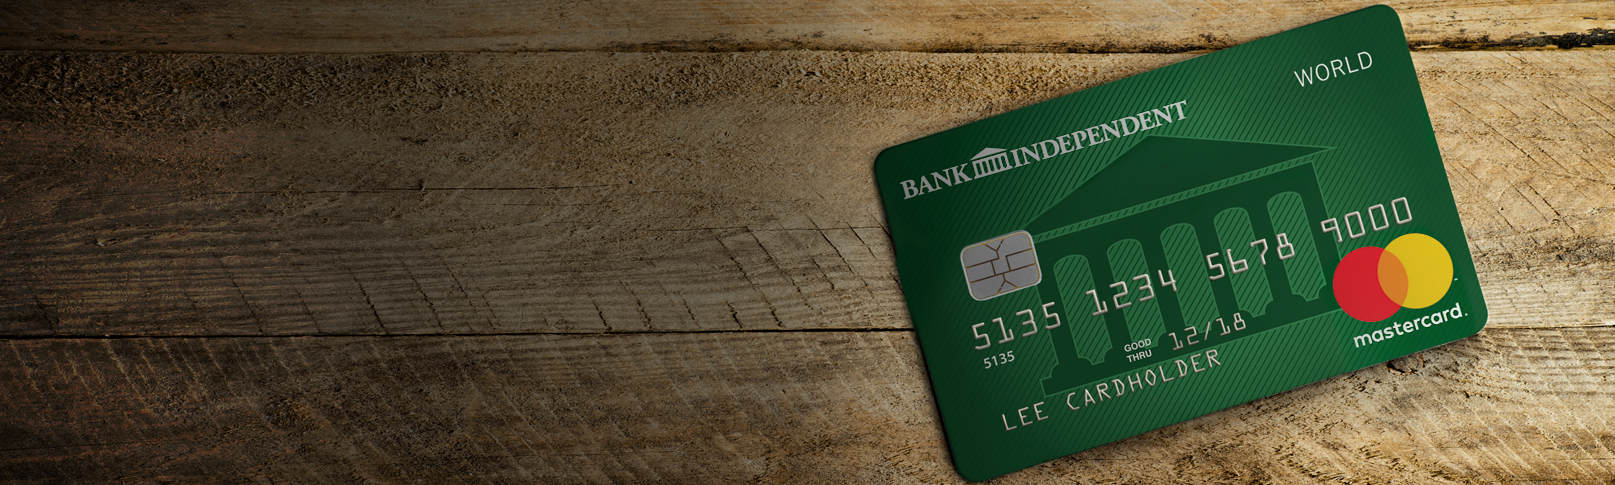 Image of Personal Credit Card on a wood background